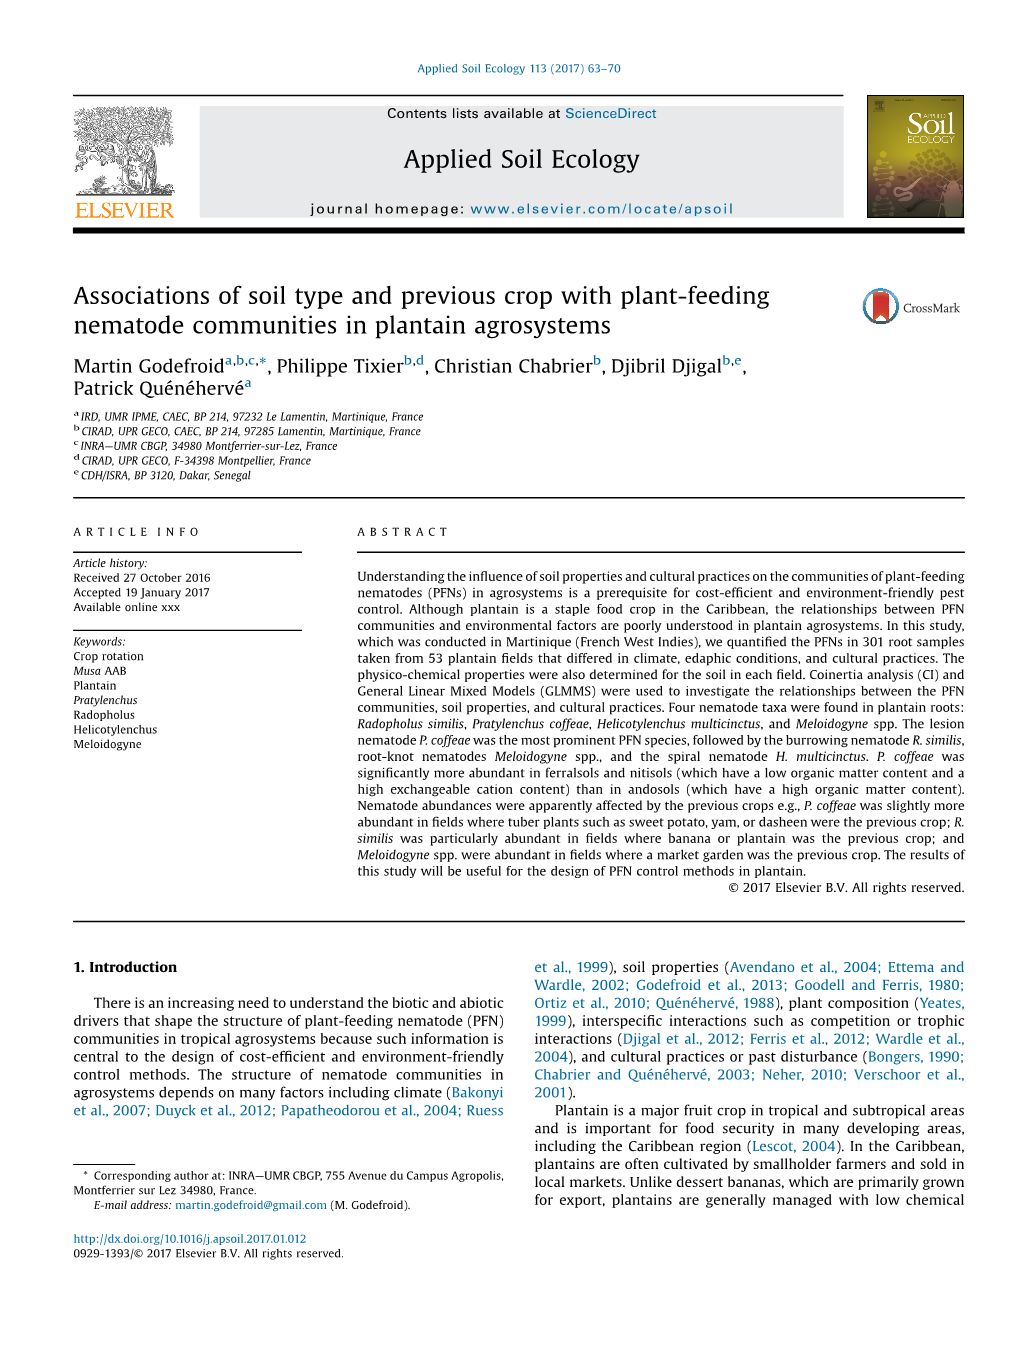 Associations of Soil Type and Previous Crop with Plant-Feeding Nematode Communities in Plantain Agrosystems